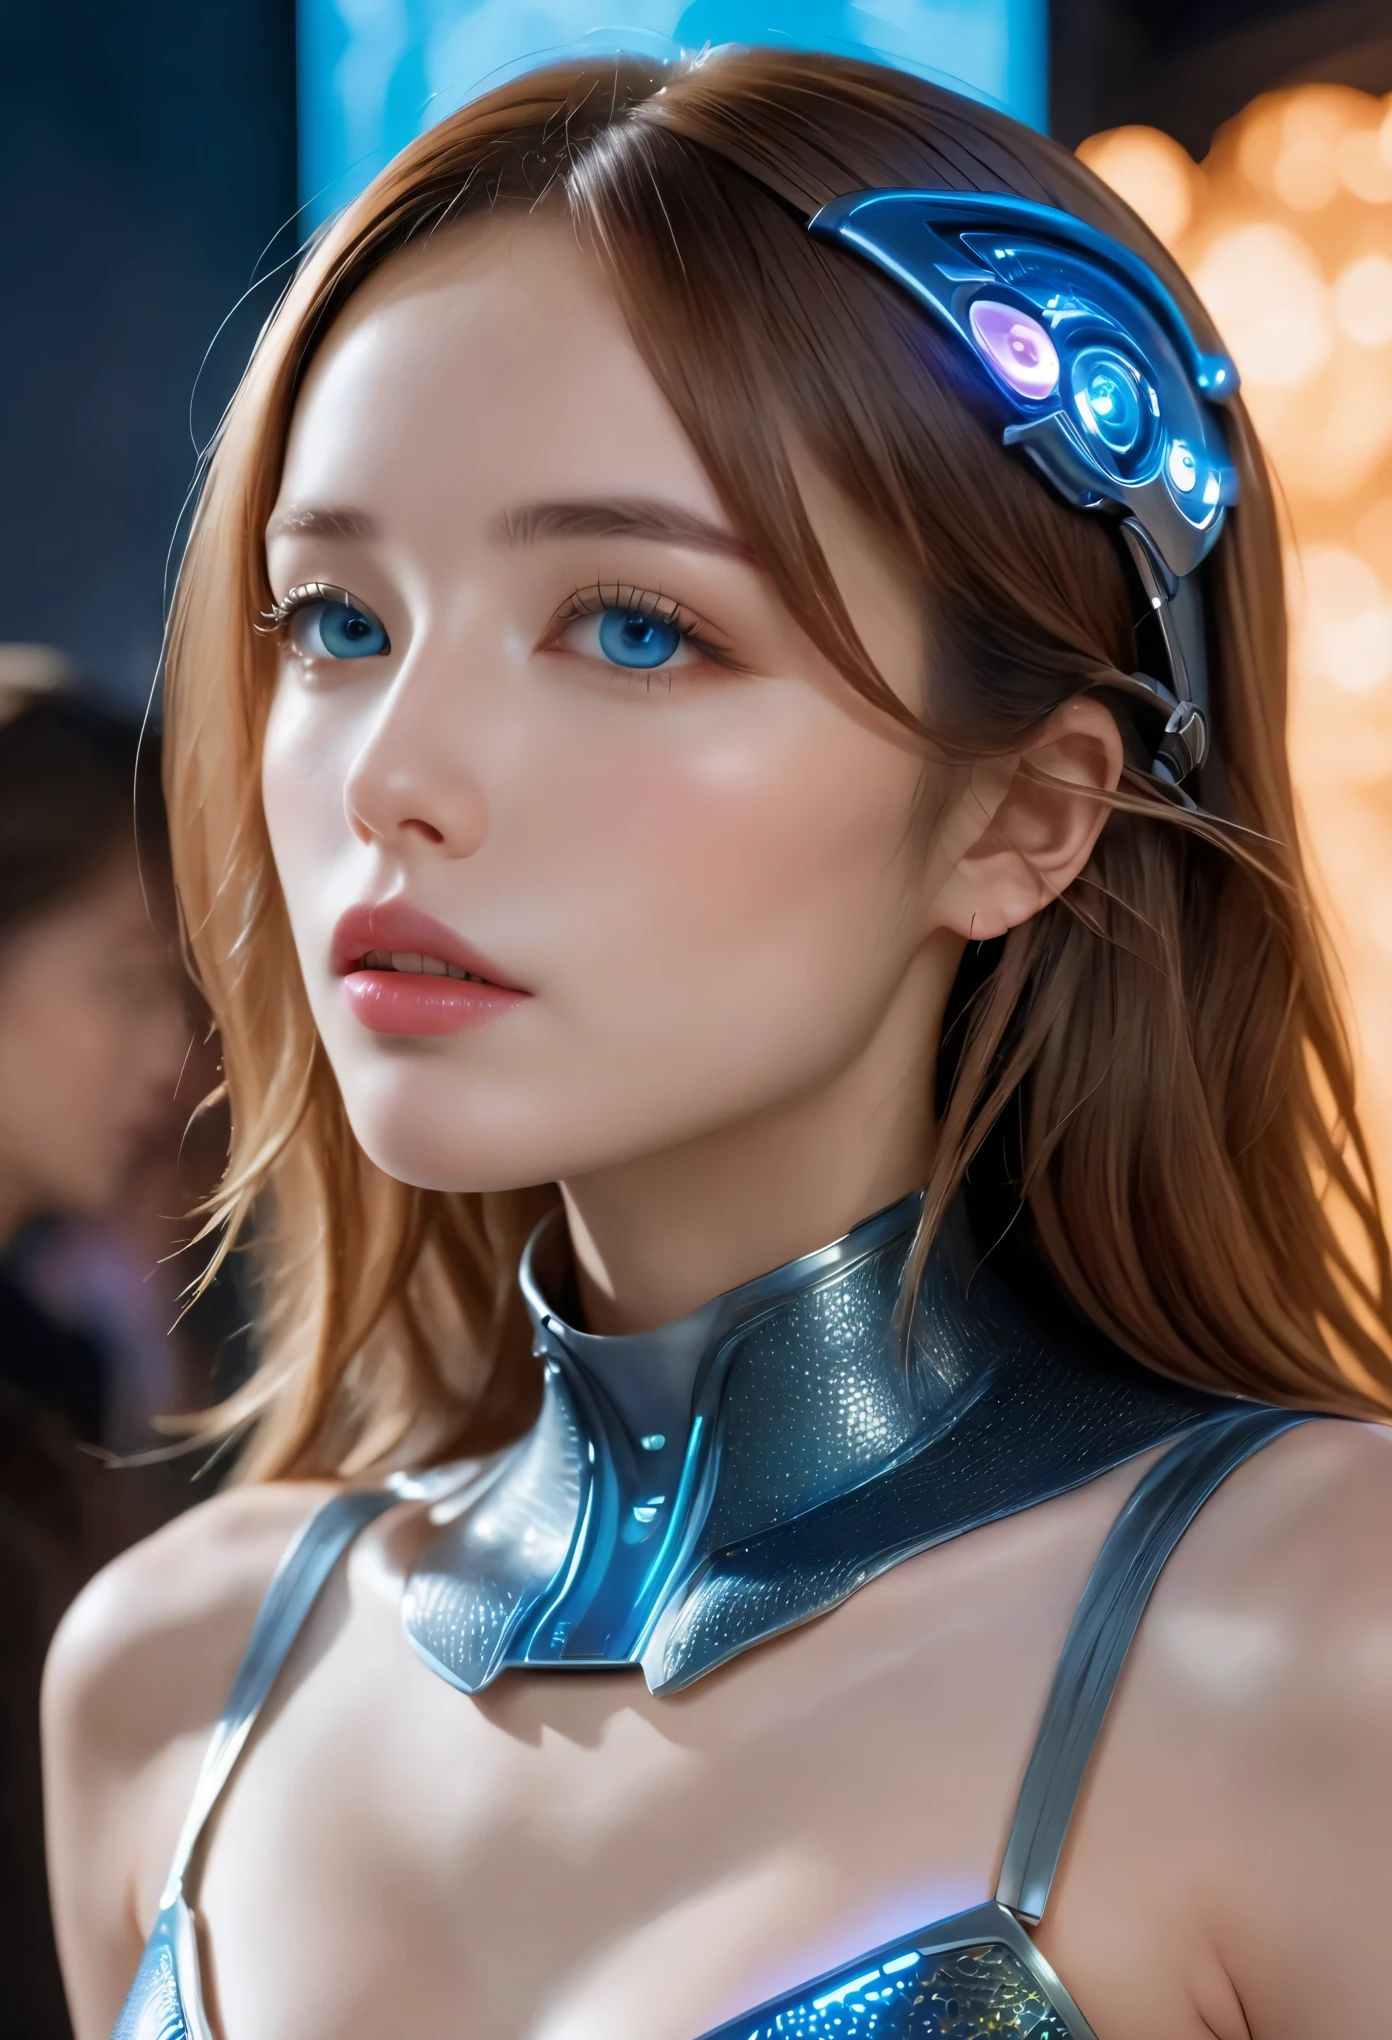 (best quality,4k,8k,highres,masterpiece:1.2),ultra-detailed,(realistic,photorealistic,photo-realistic:1.37),(bestselling female sex android:1.2),(gorgeous, perfect irises, perfect lips, perfect teeth),(flawless skin, soft front lighting, glow, HDR),(soothing colors)An exhibition showcasing AI-equipped autonomous female androids exhibiting various sex positions, adorned with a beautiful face and seductive gestures. The androids' eyes, lips, and faces are exquisitely detailed, creating a mesmerizingly realistic appearance. The exhibition is a masterpiece of modern art, combining the mediums of sculpture and technology to blur the boundaries between human and machine. The androids' bodies are crafted with ultra-realistic materials, utilizing physically-based rendering techniques to achieve a photorealistic effect. The lighting is carefully designed to accentuate the androids' features, with studio lighting creating a captivating atmosphere. The colors exhibit a vivid and alluring palette, enhancing the seductive nature of the exhibition. The exhibition boasts high-resolution visuals, such as 4k and 8k displays, allowing visitors to immerse themselves in the intricate details of the androids' bodies and expressions. The scene is further enhanced by elements such as bokeh, creating a dreamy and ethereal ambiance. The exhibition combines elements of photography and concept art, resulting in an innovative and provocative art form. (NSFW:1.5), Her chest, stomach, and genitals are covered with artificial skin. Sex androids have beautiful, sexually attractive faces that are so detailed that they are indistinguishable from real humans (There are swede girl, Russian girl, Saudi girl, and Japanese girl types:1.8). Their eyes are blue.